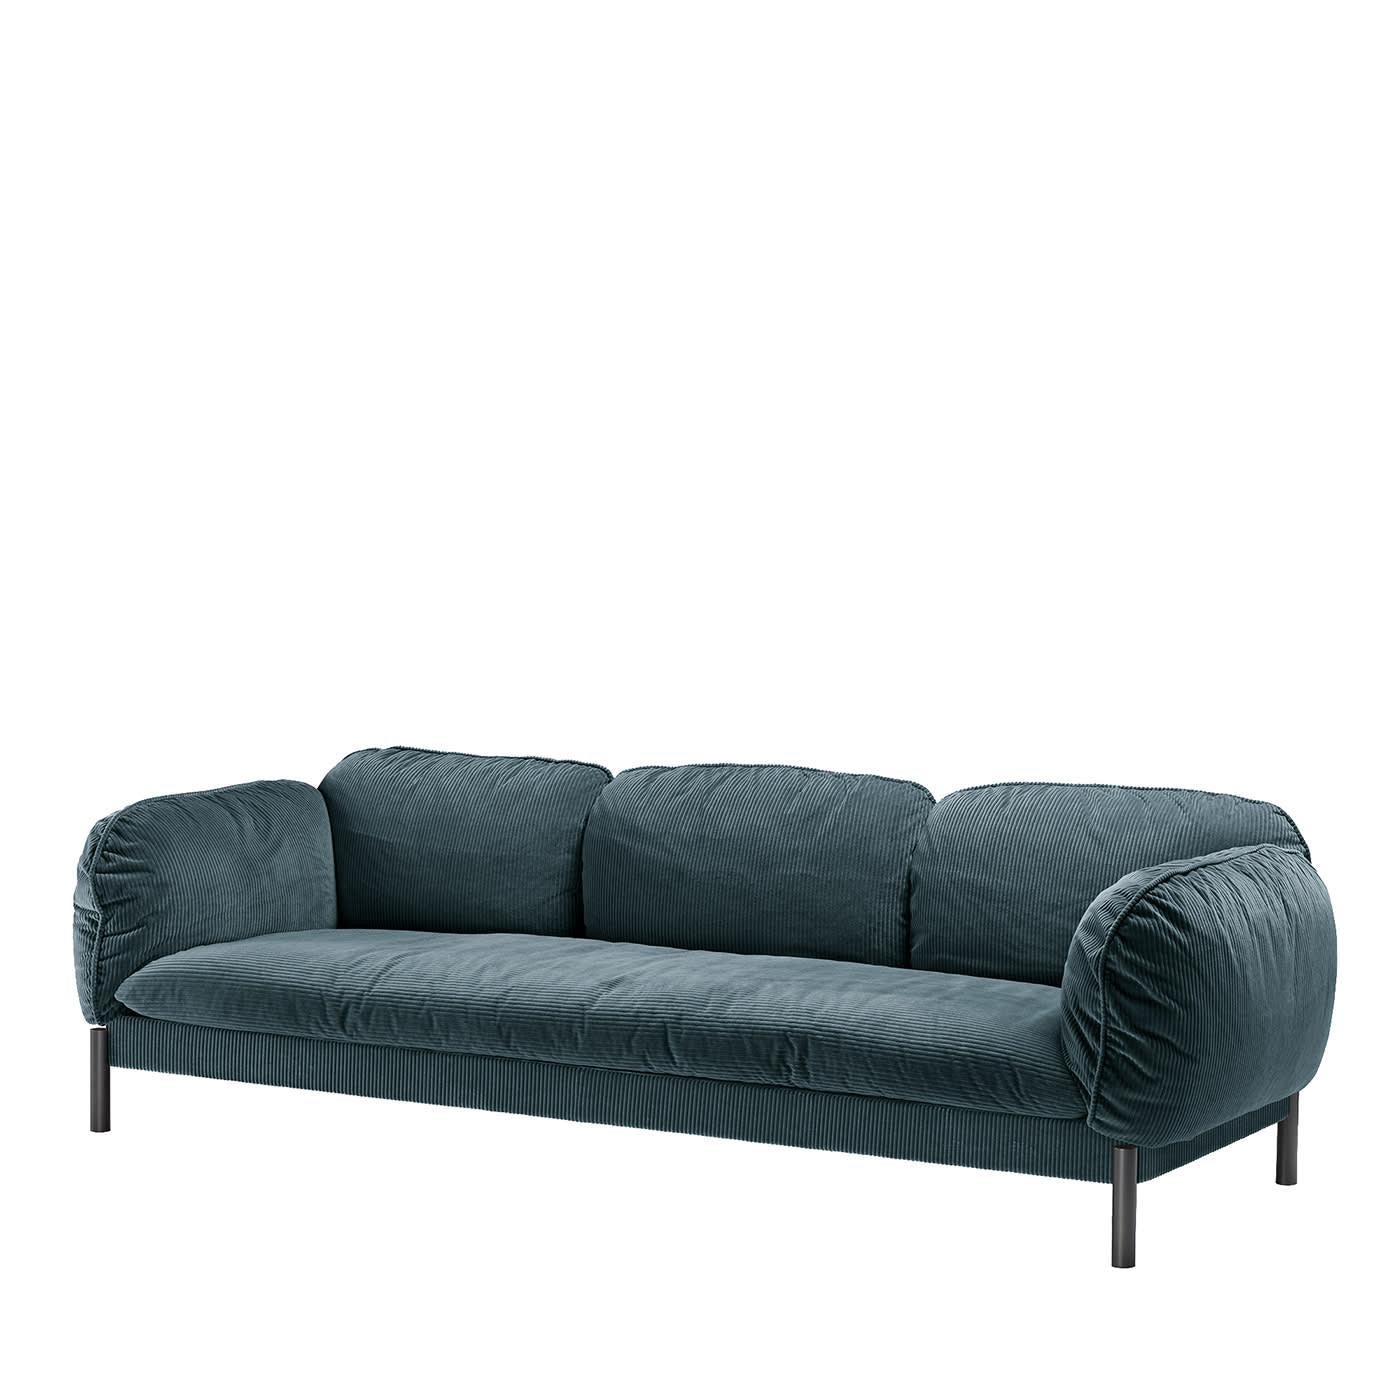 A trend echoing vintage references, corduroy was chosen by Lorenza Bozzoli as upholstery to dress this exquisite sofa, a piece that is an invitation to enjoy moments of pure comfort thanks to its fluffy, cushioned design and soft, blue velvet cover.